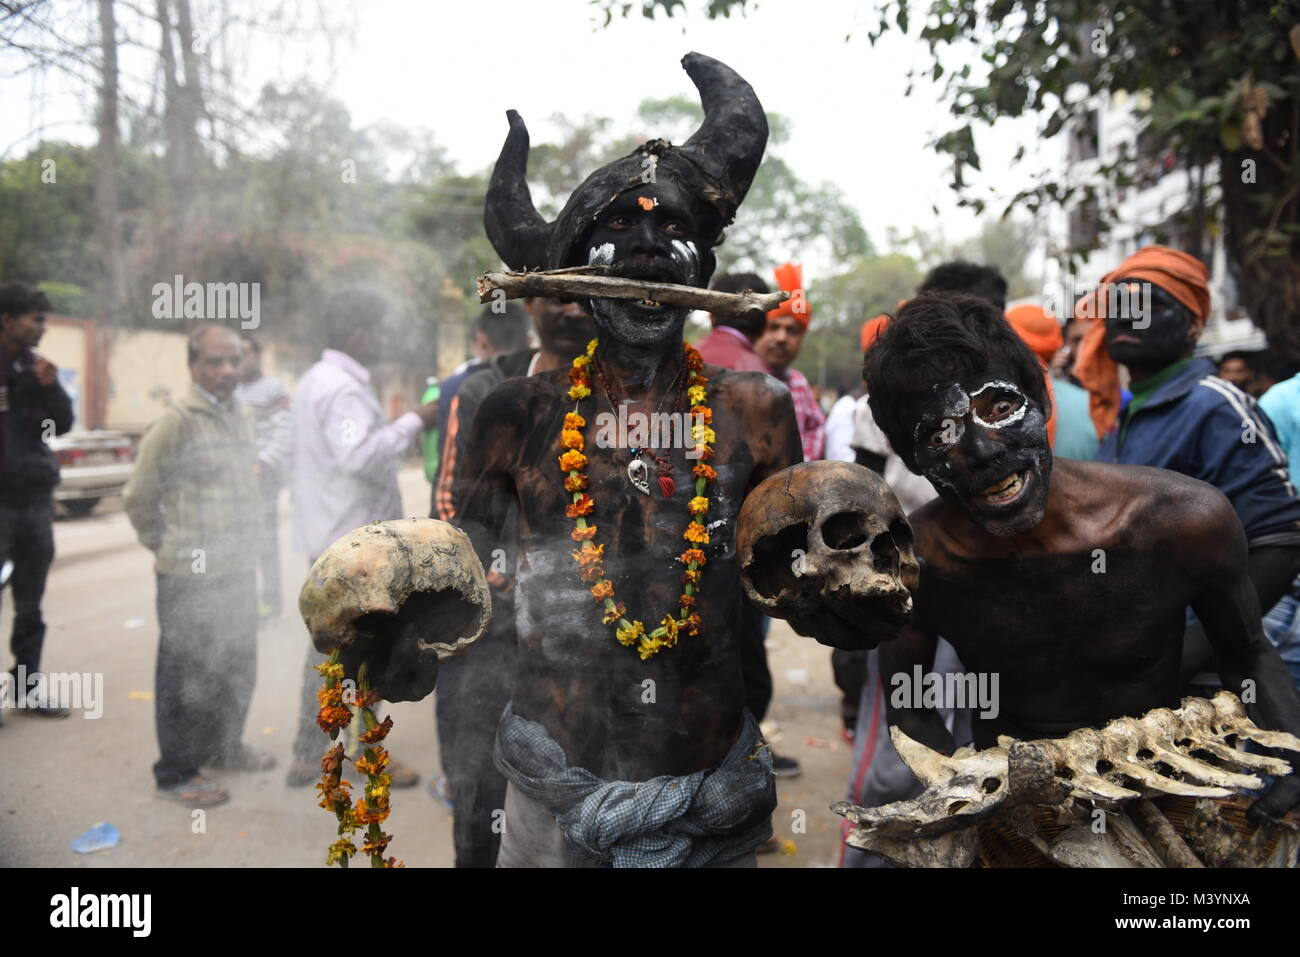 Hindu aghoris are performing with dead bodies & human skulls at Lord Shiva Barat procession on the occasion of Maha Shivaratri festival celebration in Allahabad , India on February 12 , 2018. Stock Photo